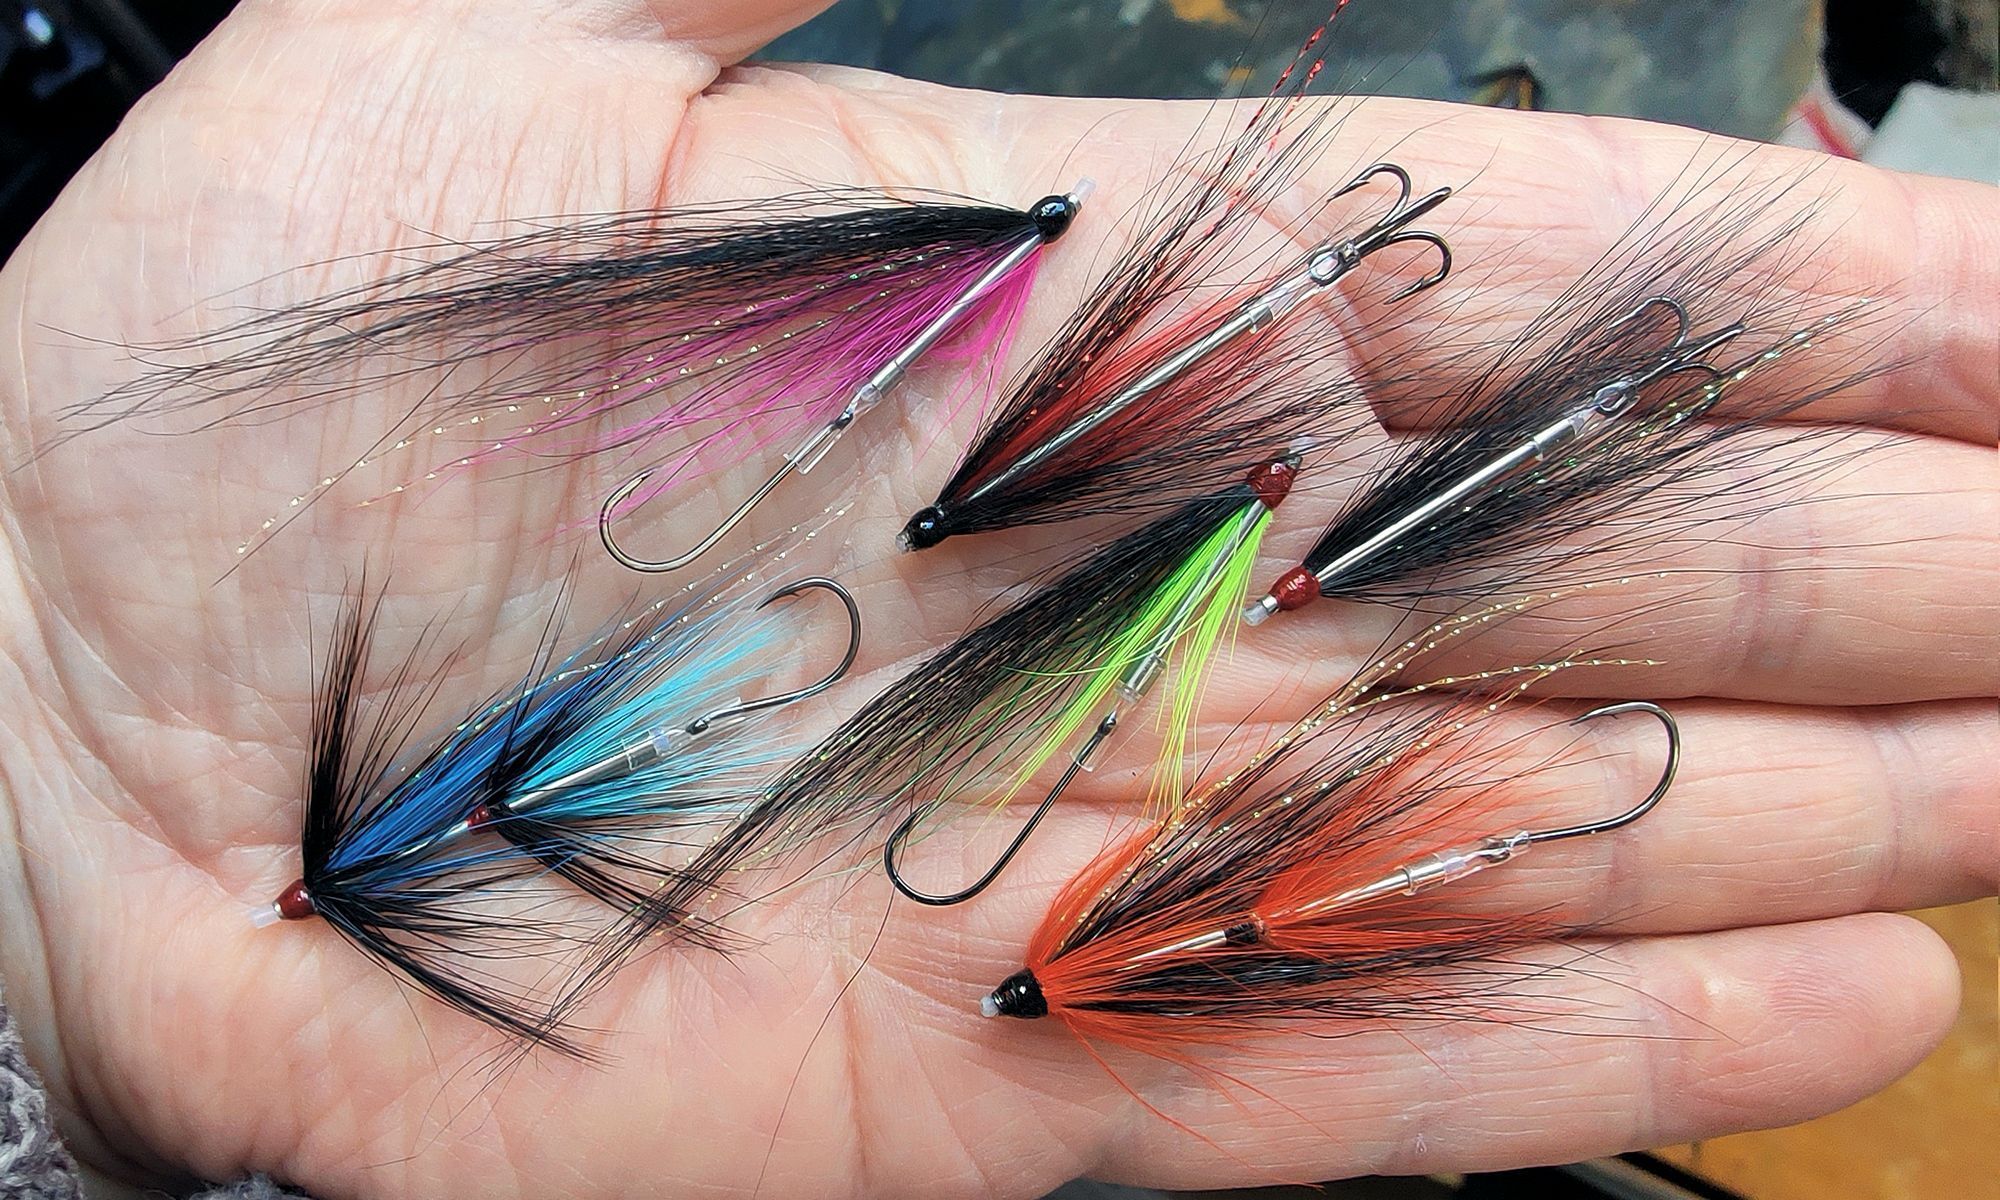 SEA TROUT FLIES – Sea Trout Fishing and Fly Tying